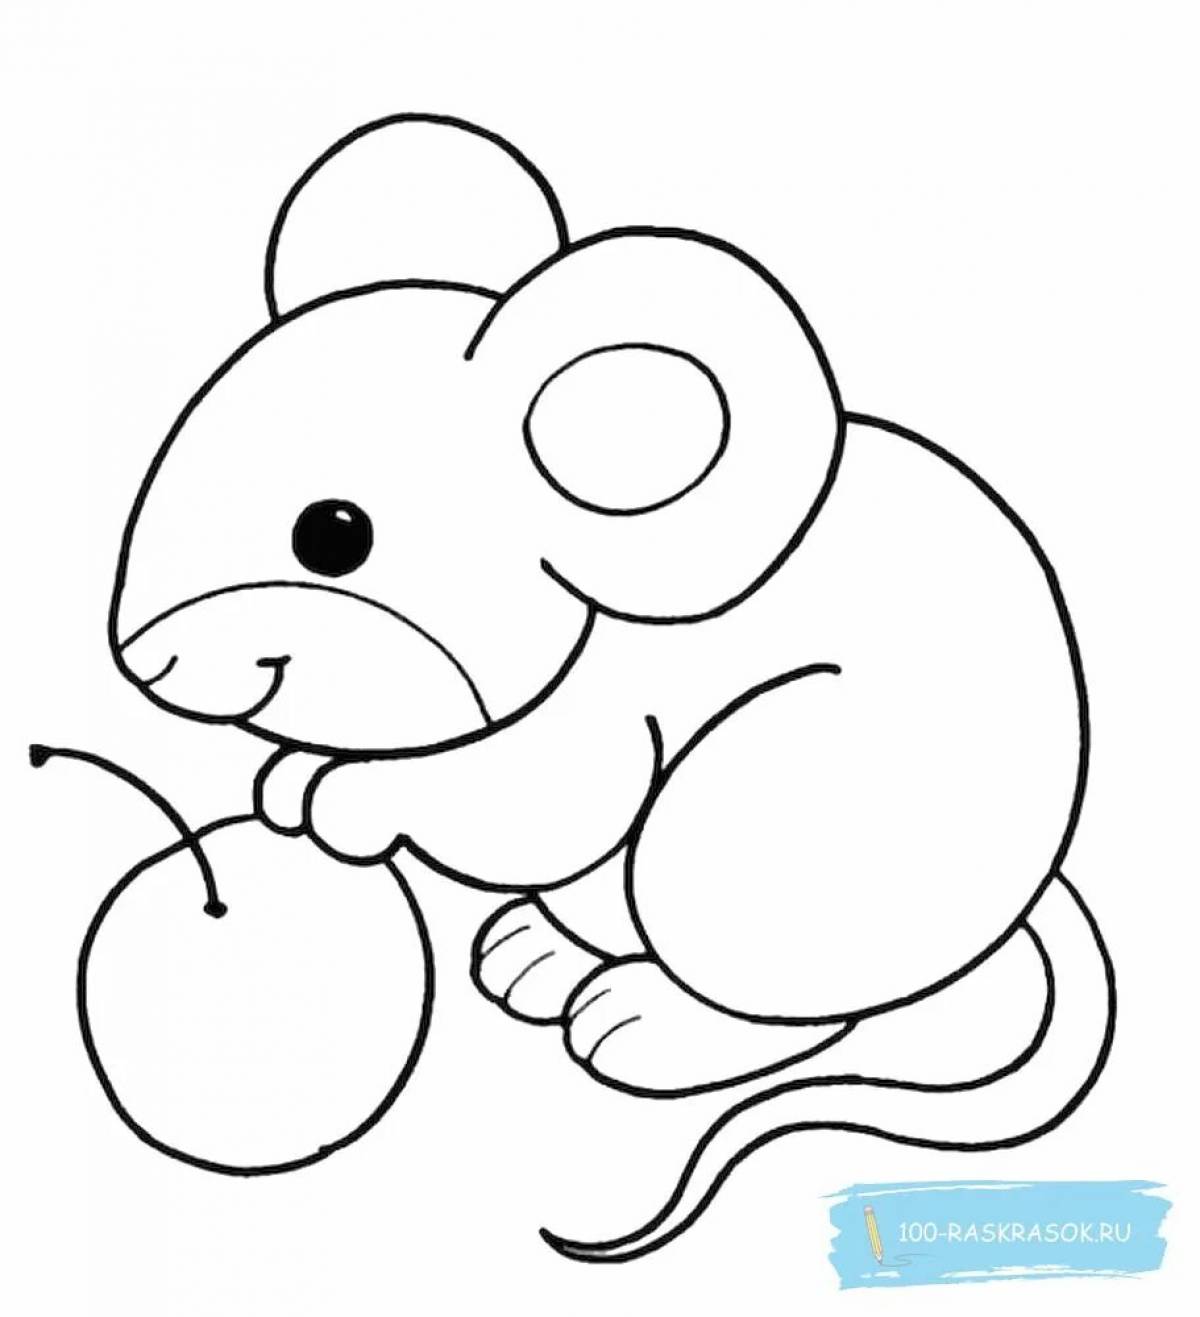 Dazzling coloring mouse for children 3-4 years old